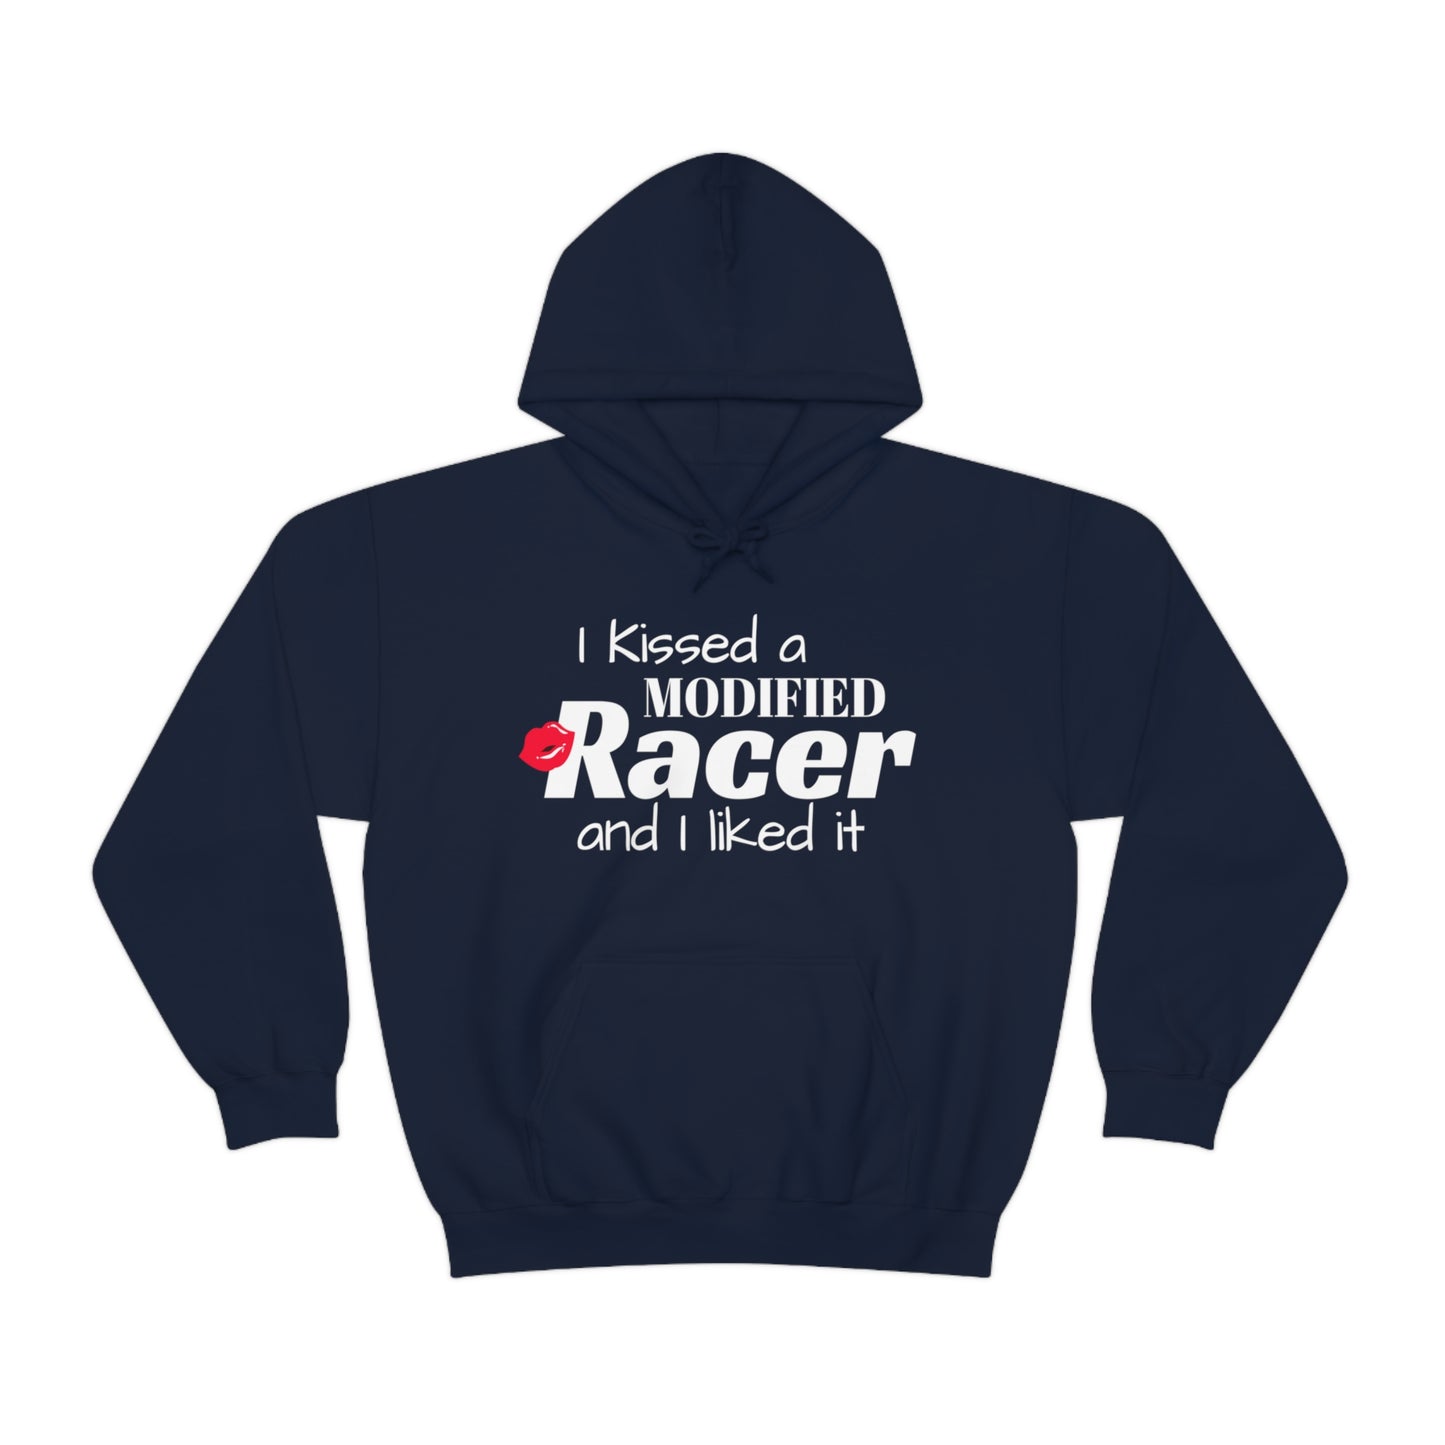 I Kissed A Modified Racer And I Liked It Hooded Sweatshirt